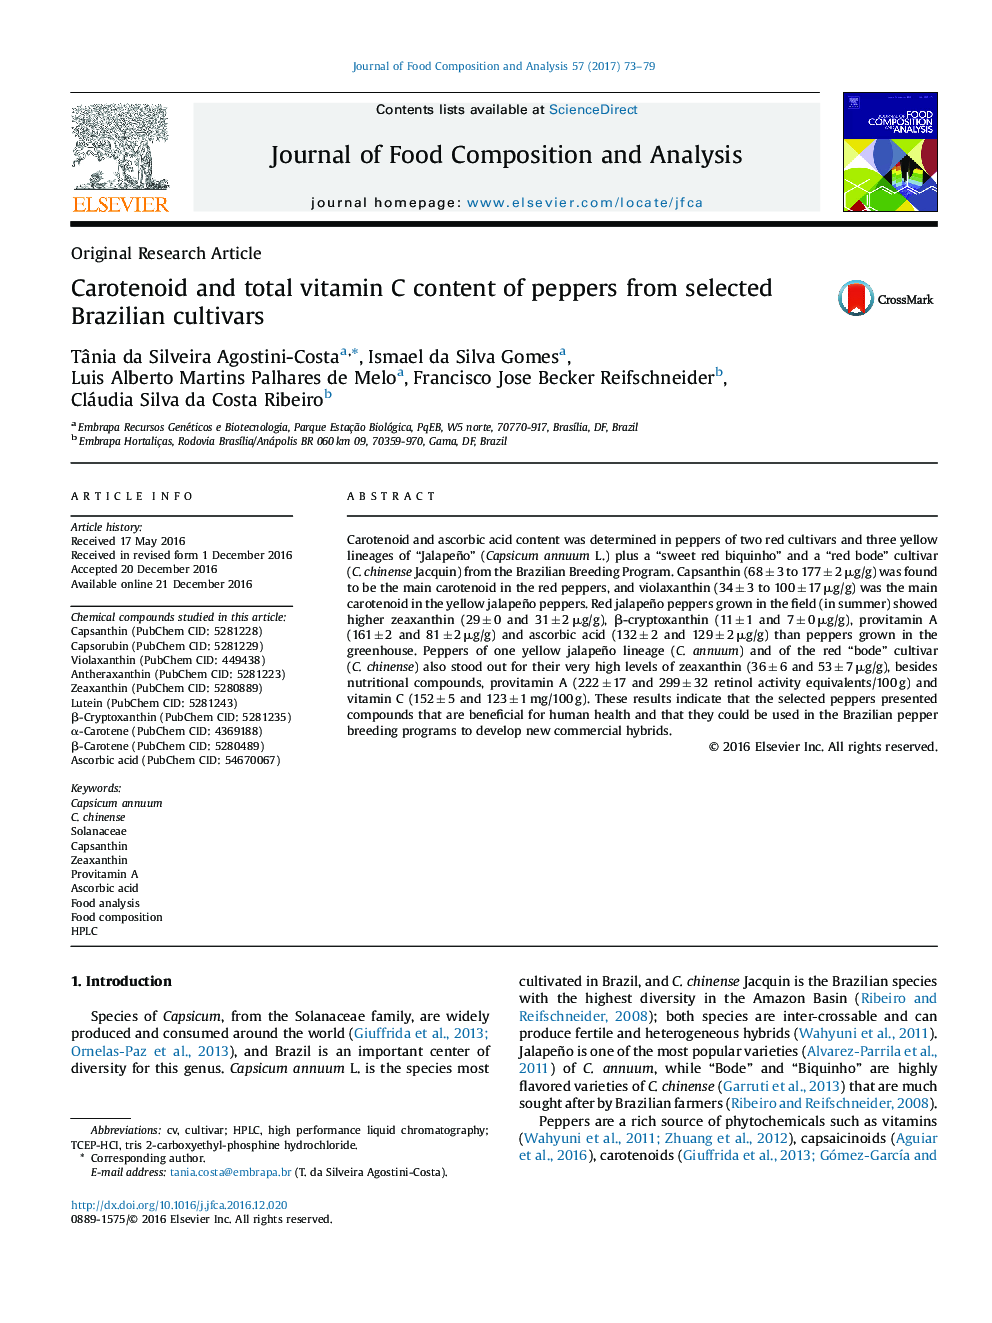 Original Research ArticleCarotenoid and total vitamin C content of peppers from selected Brazilian cultivars